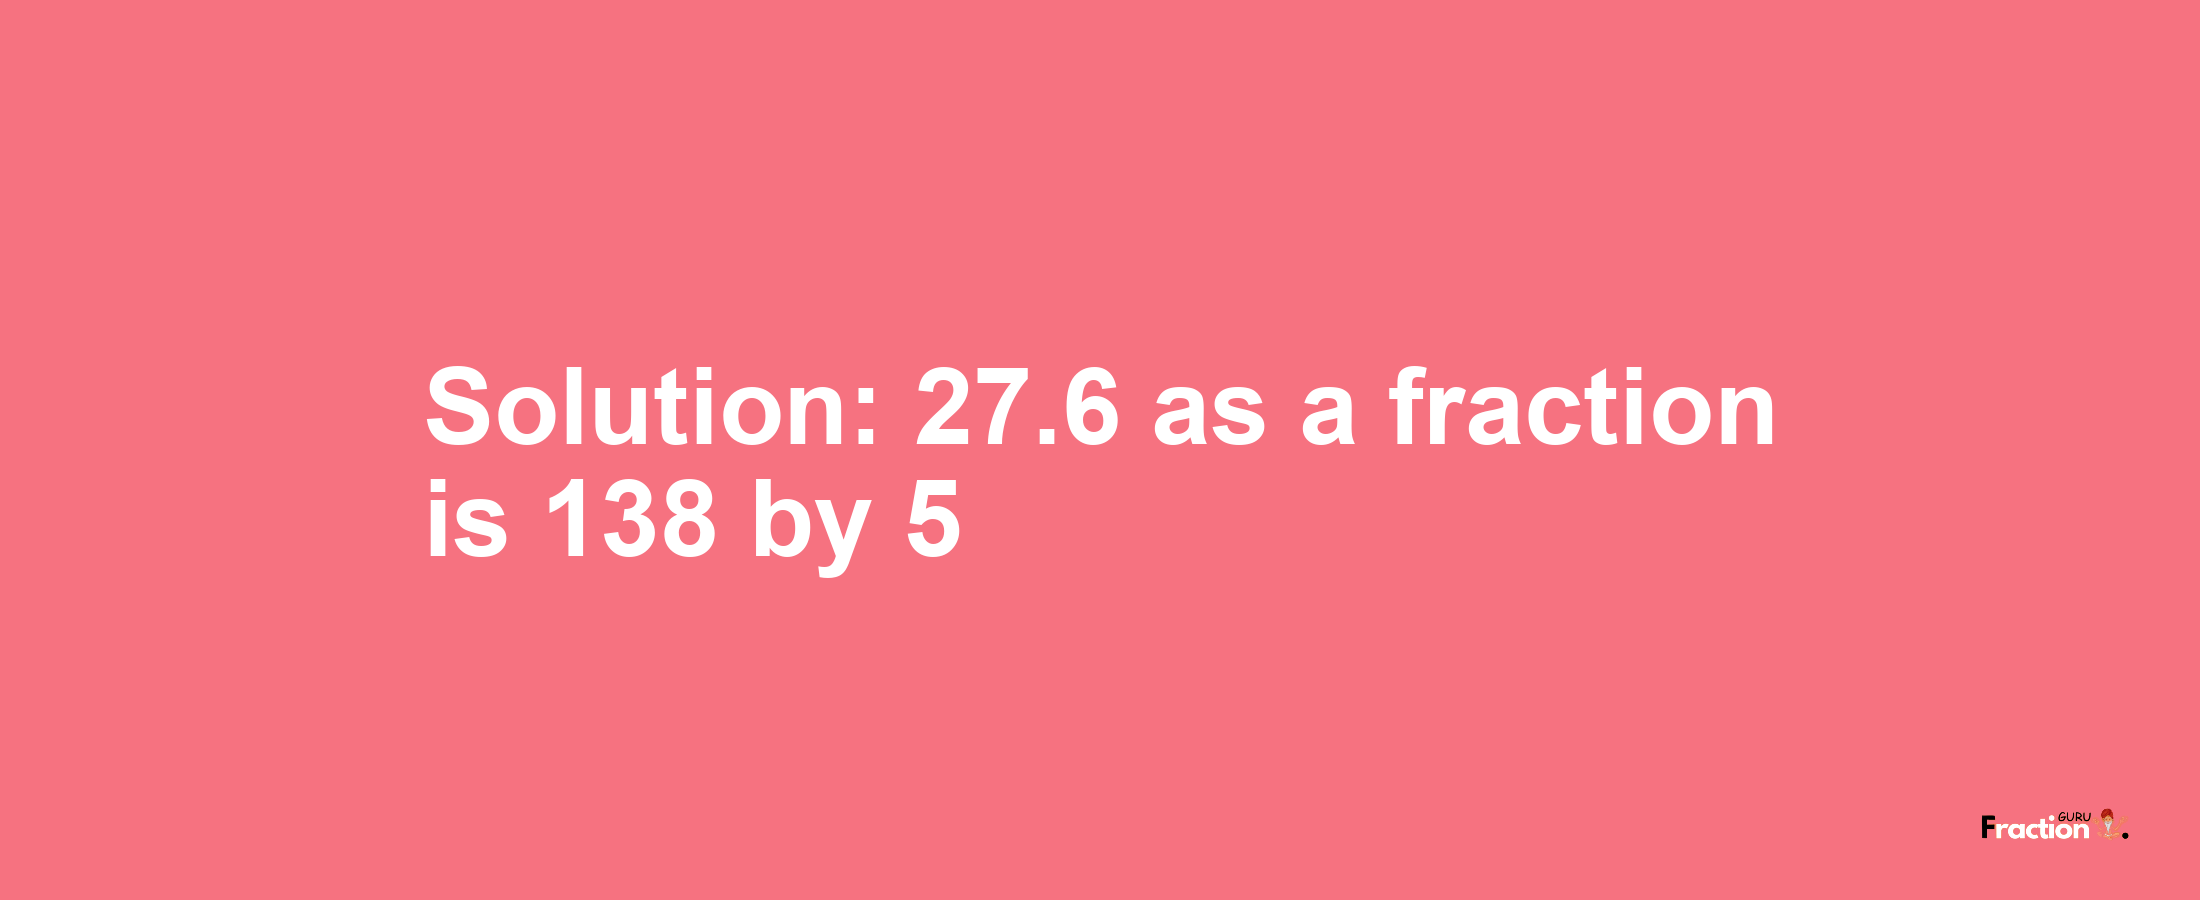 Solution:27.6 as a fraction is 138/5